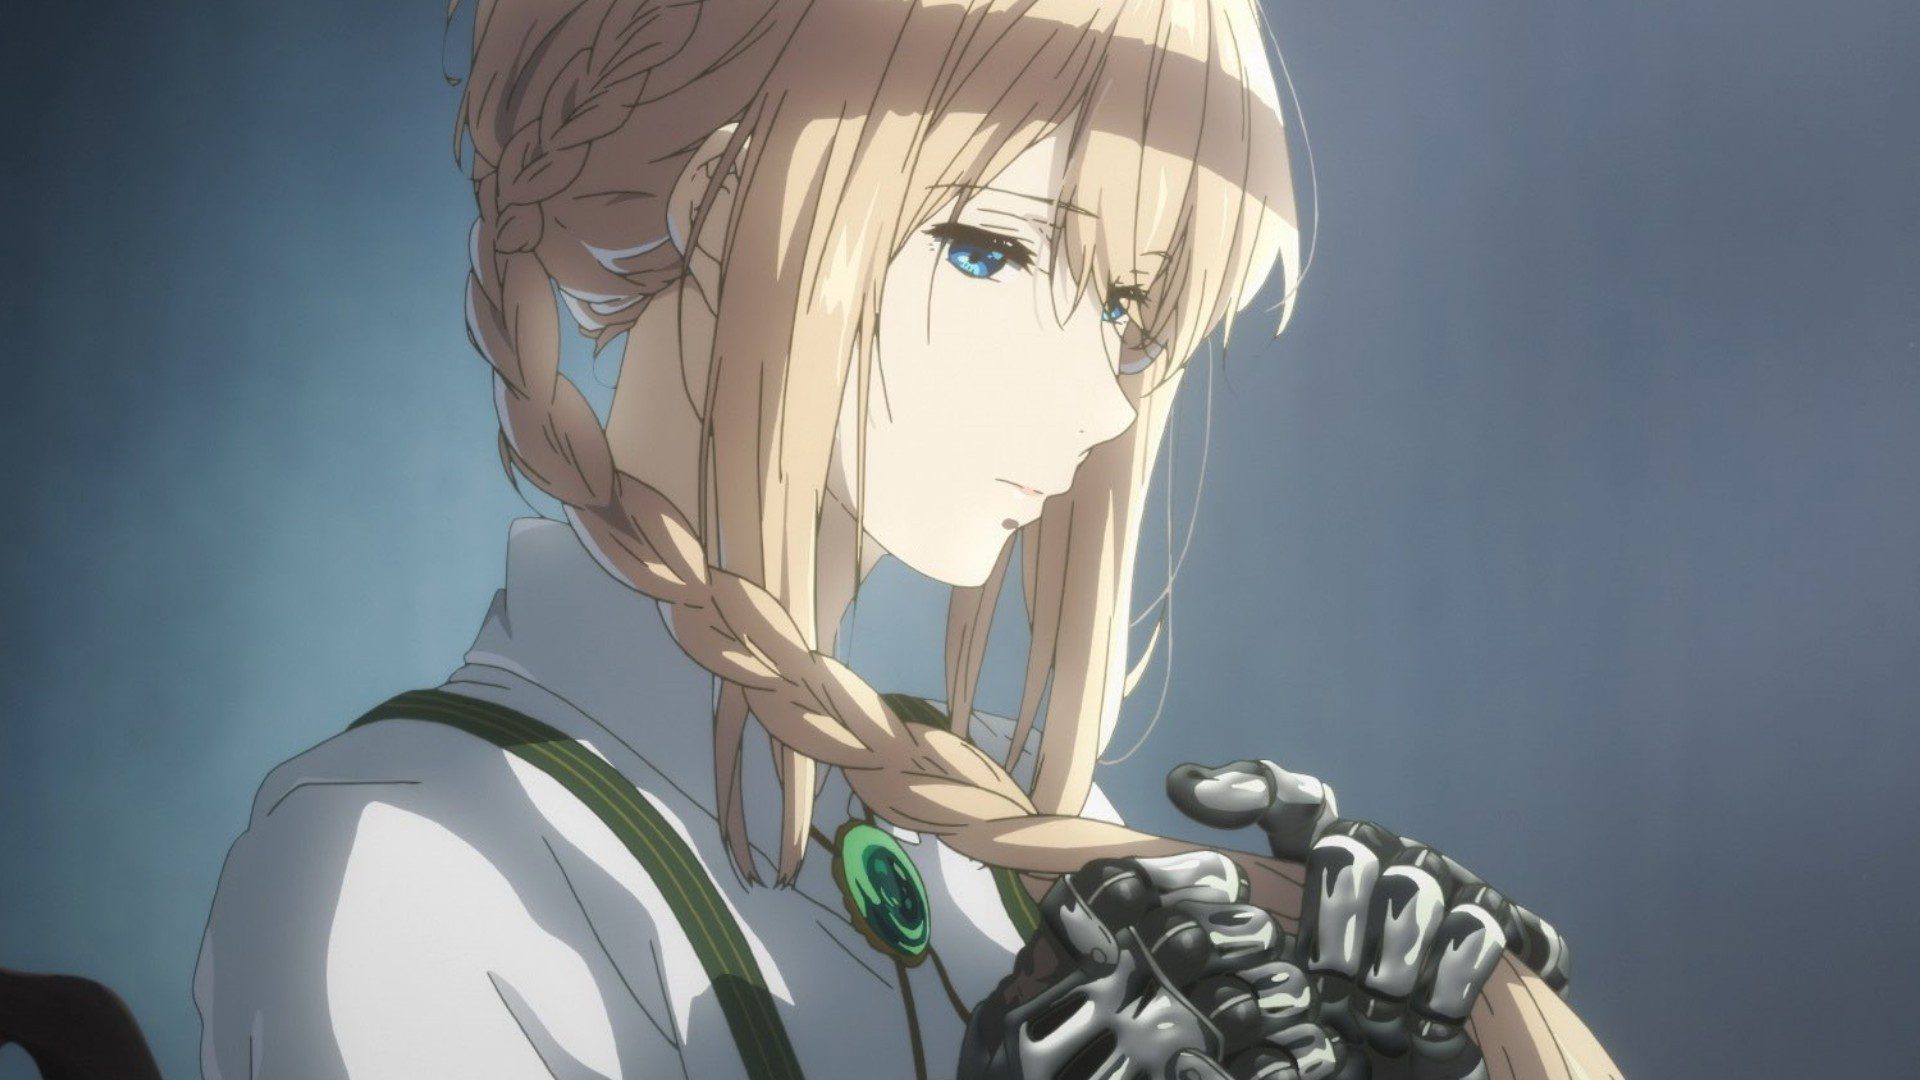 15 Quotes About Love In Anime - Violet Evergarden